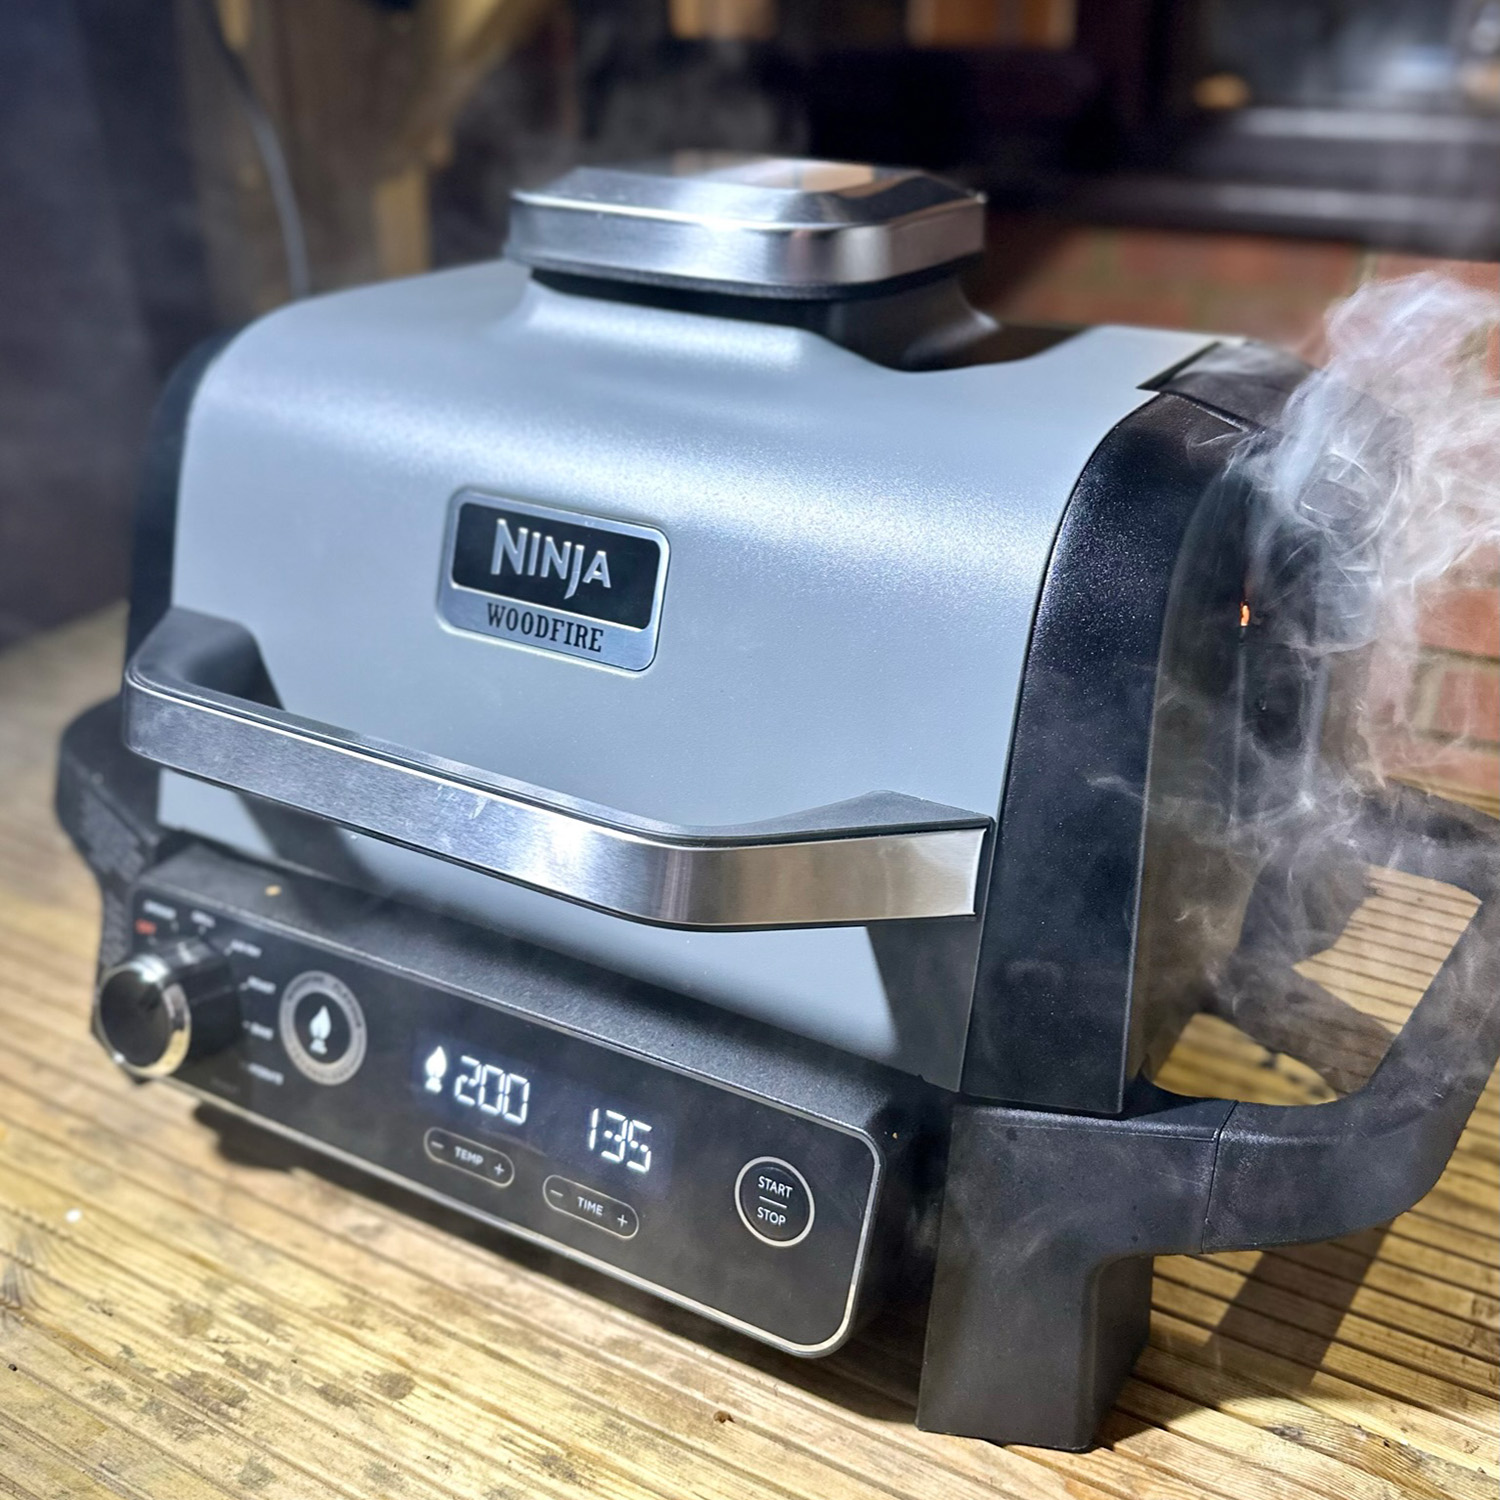 Ninja Woodfire Review: Infuse Smoke into Your Cooking!